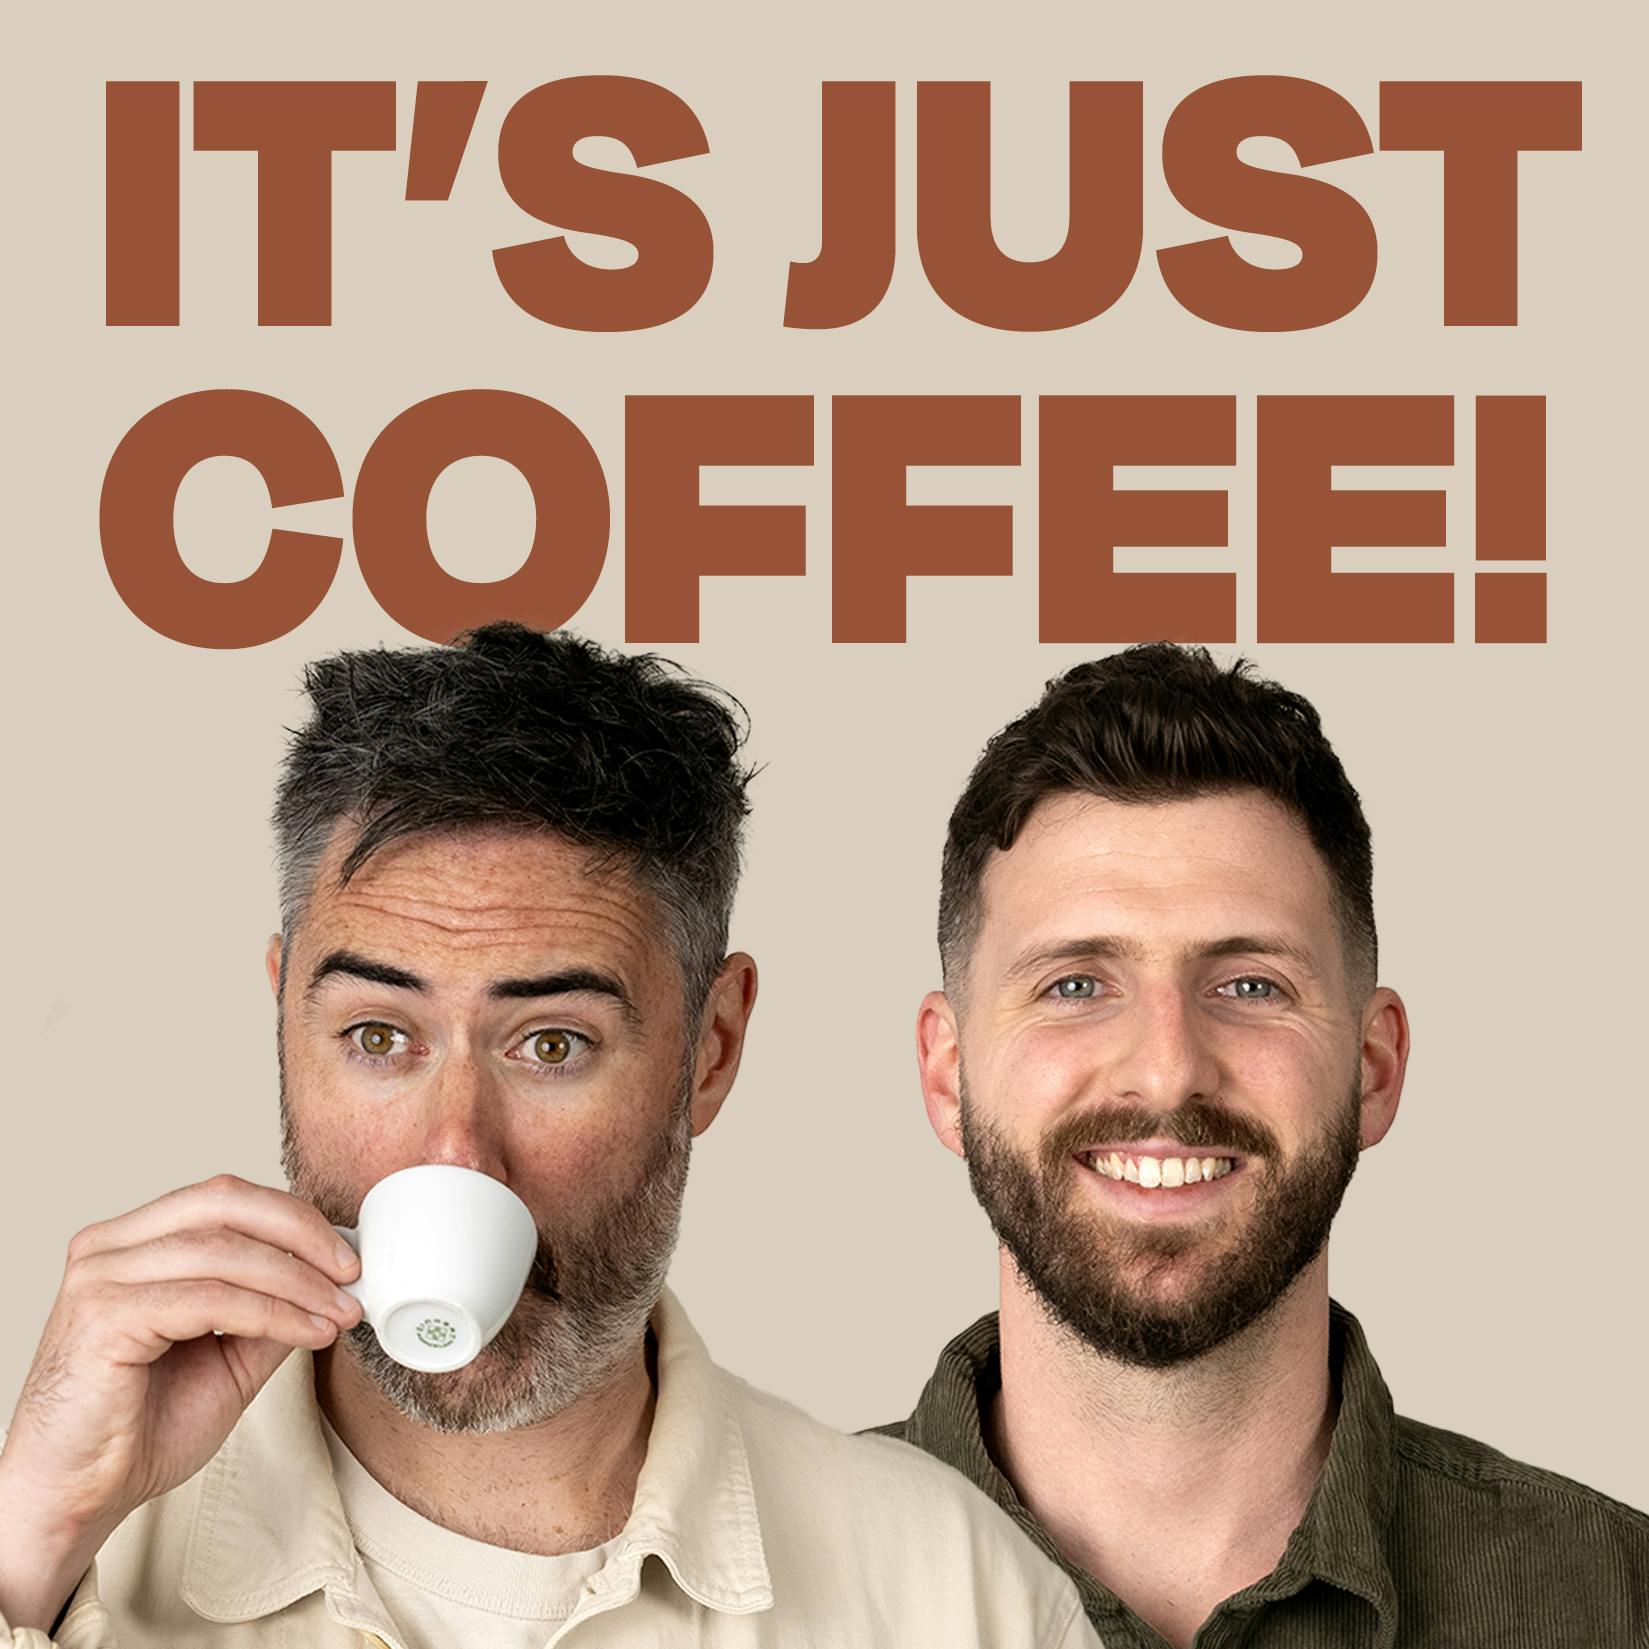 IT’S JUST COFFEE! - “meeting the coffee team and the dream”